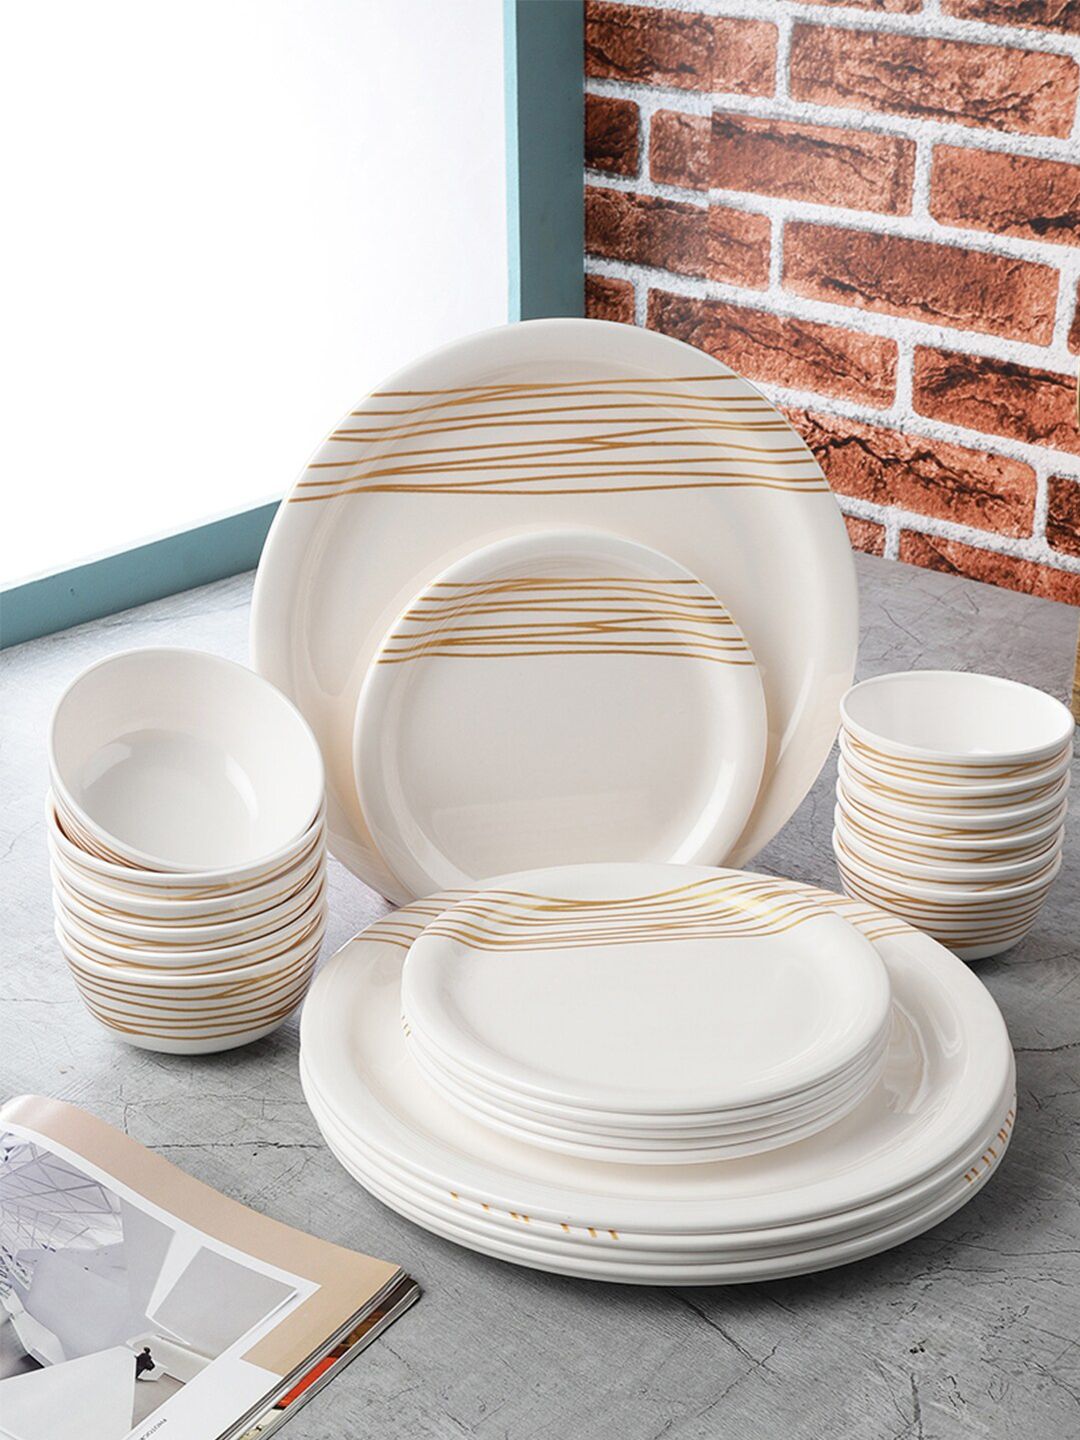 Servewell Pack Of 24 White & Gold-Toned Printed Melamine Round Dinner Set Price in India